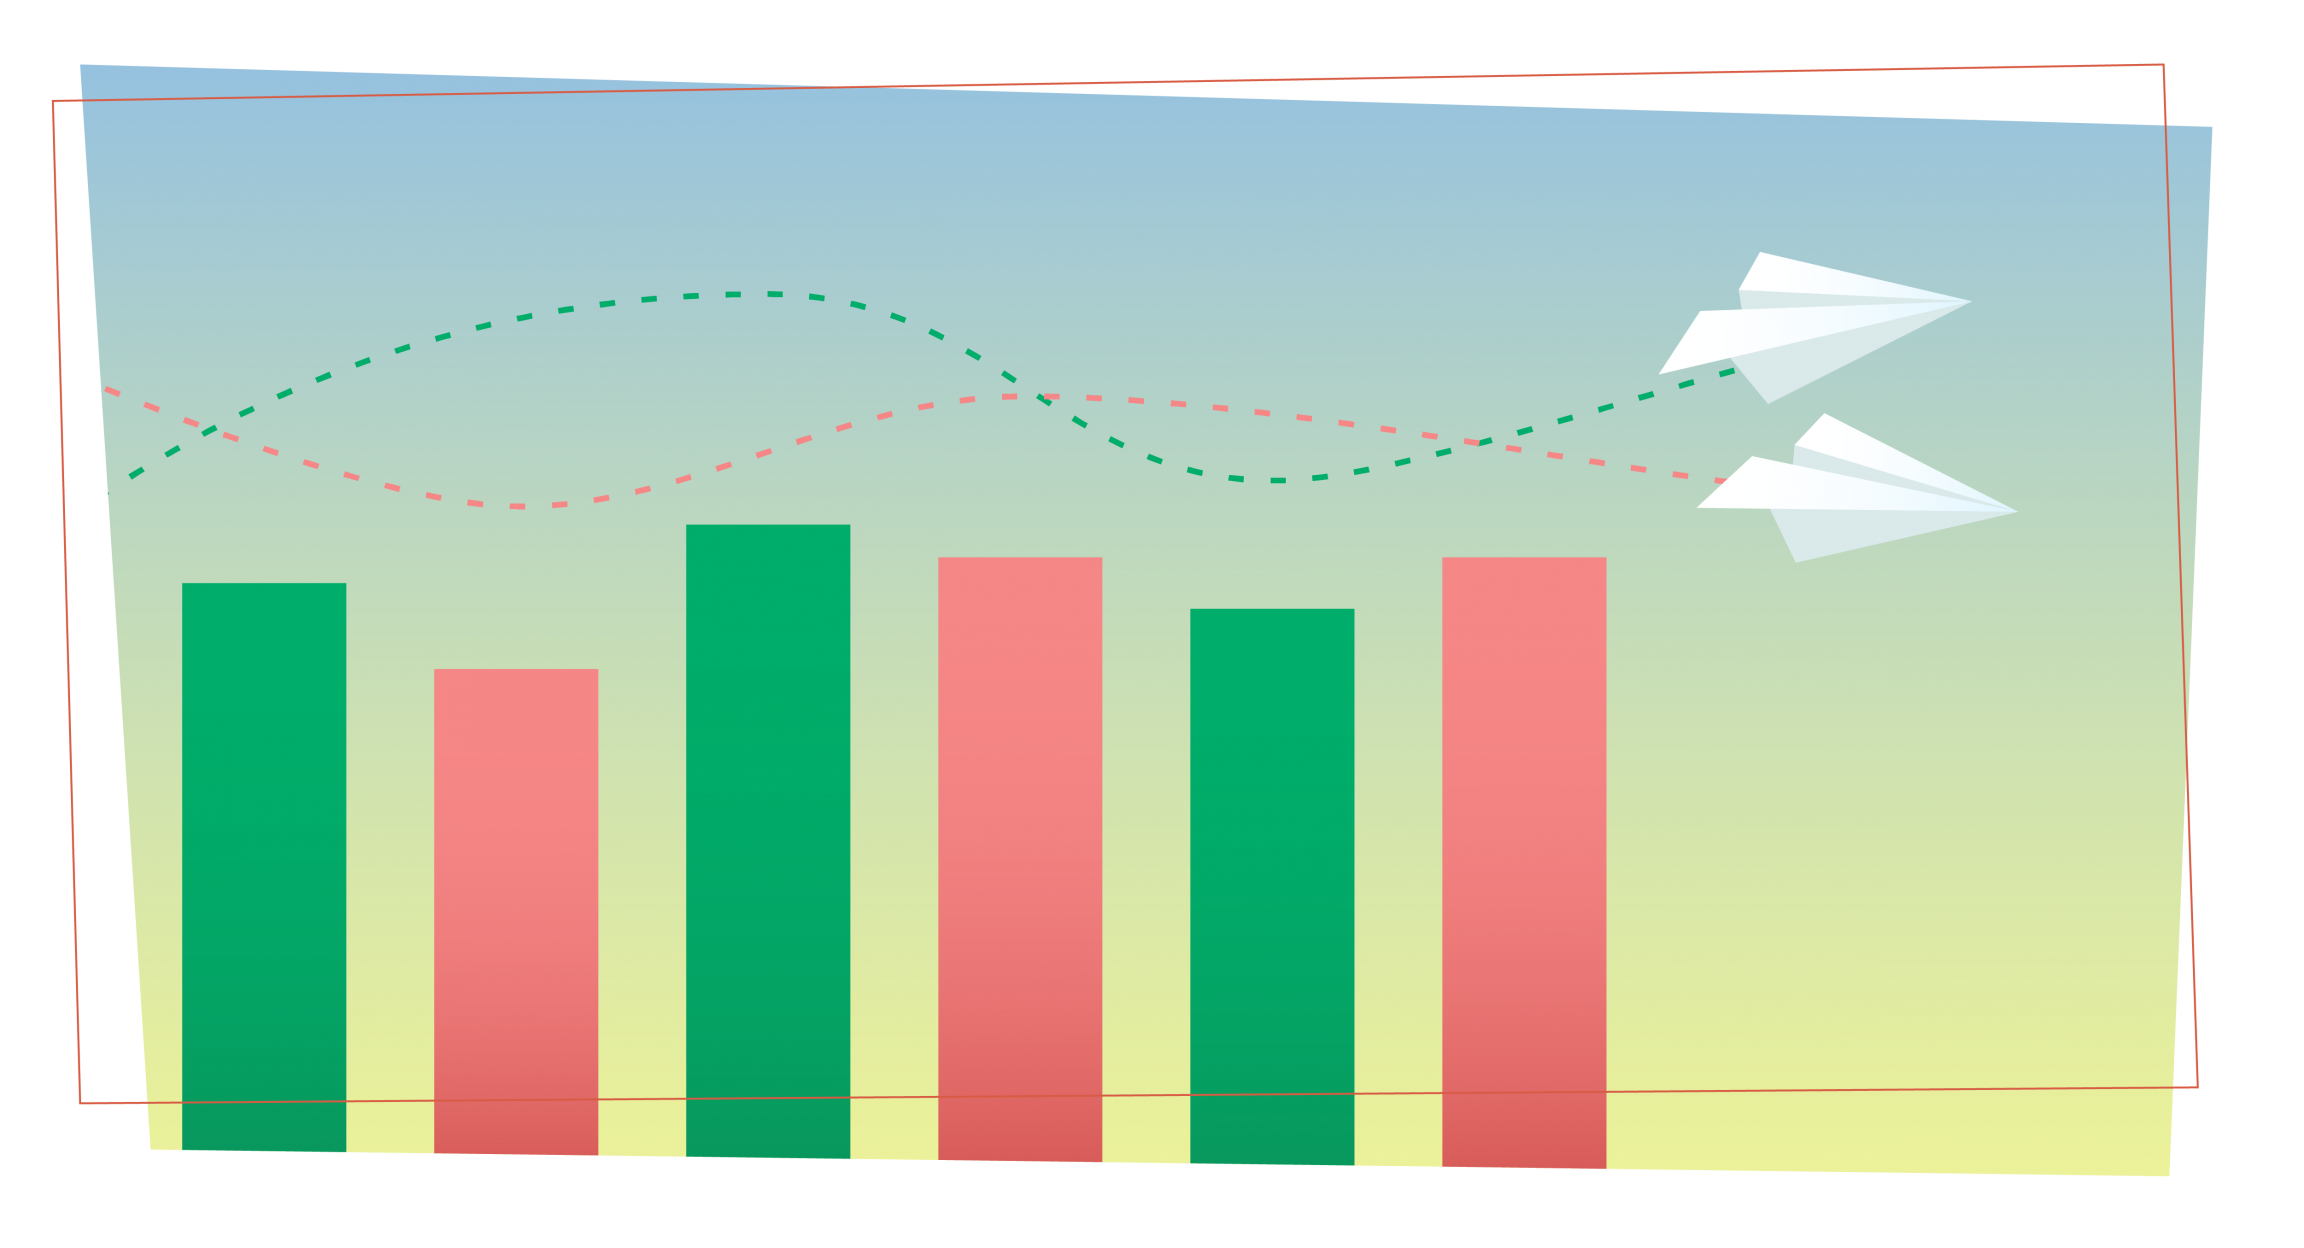 two paper planes have intersecting paths as they fly over a bar chart with red and green bars